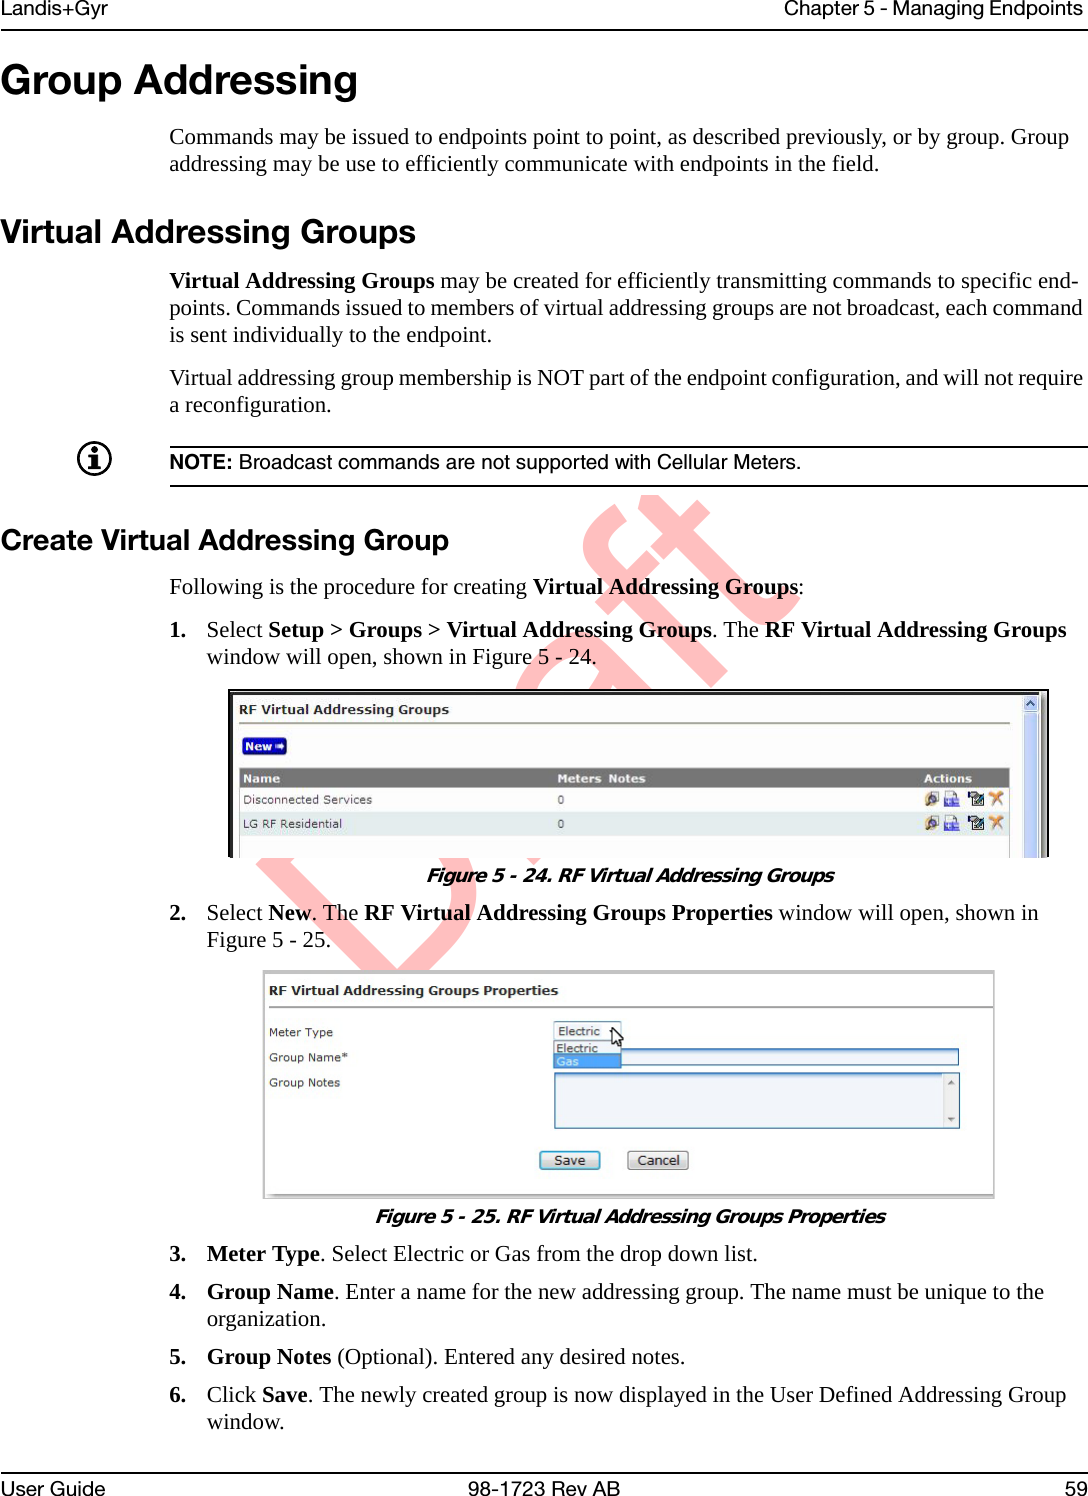 DraftLandis+Gyr Chapter 5 - Managing Endpoints User Guide 98-1723 Rev AB 59Group AddressingCommands may be issued to endpoints point to point, as described previously, or by group. Group addressing may be use to efficiently communicate with endpoints in the field.Virtual Addressing GroupsVirtual Addressing Groups may be created for efficiently transmitting commands to specific end-points. Commands issued to members of virtual addressing groups are not broadcast, each command is sent individually to the endpoint. Virtual addressing group membership is NOT part of the endpoint configuration, and will not require a reconfiguration. NOTE: Broadcast commands are not supported with Cellular Meters.Create Virtual Addressing GroupFollowing is the procedure for creating Virtual Addressing Groups:1. Select Setup &gt; Groups &gt; Virtual Addressing Groups. The RF Virtual Addressing Groups window will open, shown in Figure 5 - 24.Figure 5 - 24. RF Virtual Addressing Groups2. Select New. The RF Virtual Addressing Groups Properties window will open, shown in Figure 5 - 25.Figure 5 - 25. RF Virtual Addressing Groups Properties3. Meter Type. Select Electric or Gas from the drop down list.4. Group Name. Enter a name for the new addressing group. The name must be unique to the organization.5. Group Notes (Optional). Entered any desired notes.6. Click Save. The newly created group is now displayed in the User Defined Addressing Group window.